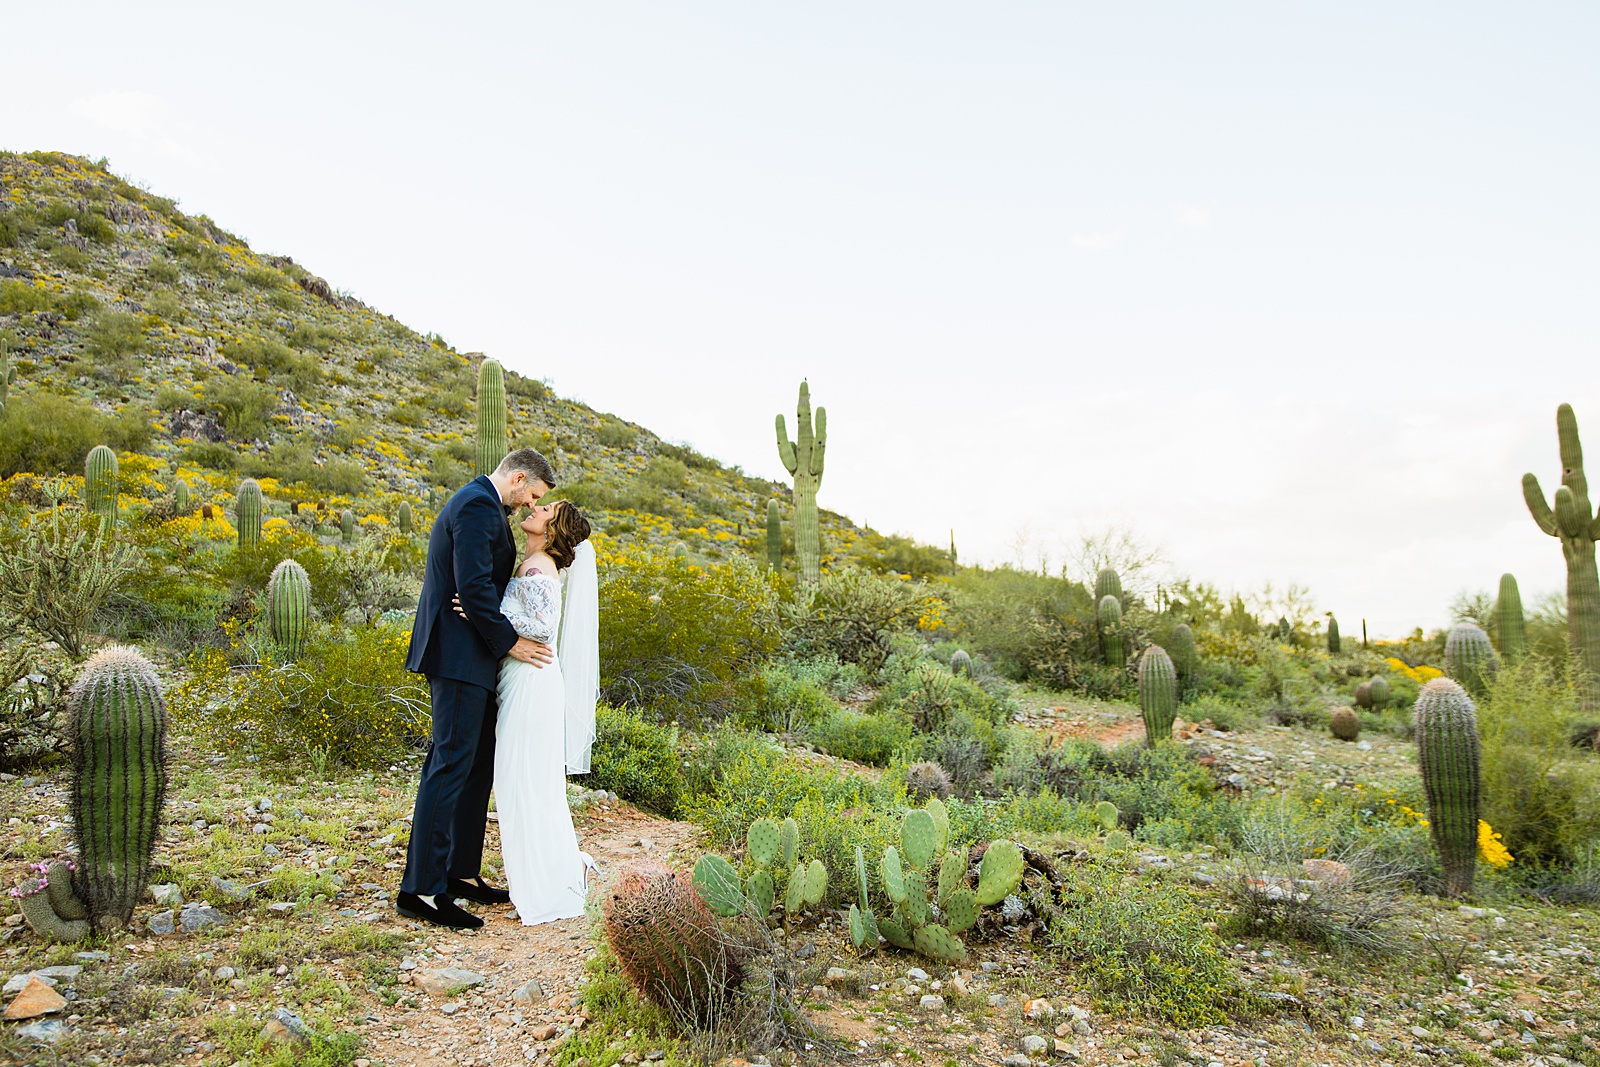 Bride and groom pose for their backyard wedding by Scottsdale wedding photographer PMA Photography.